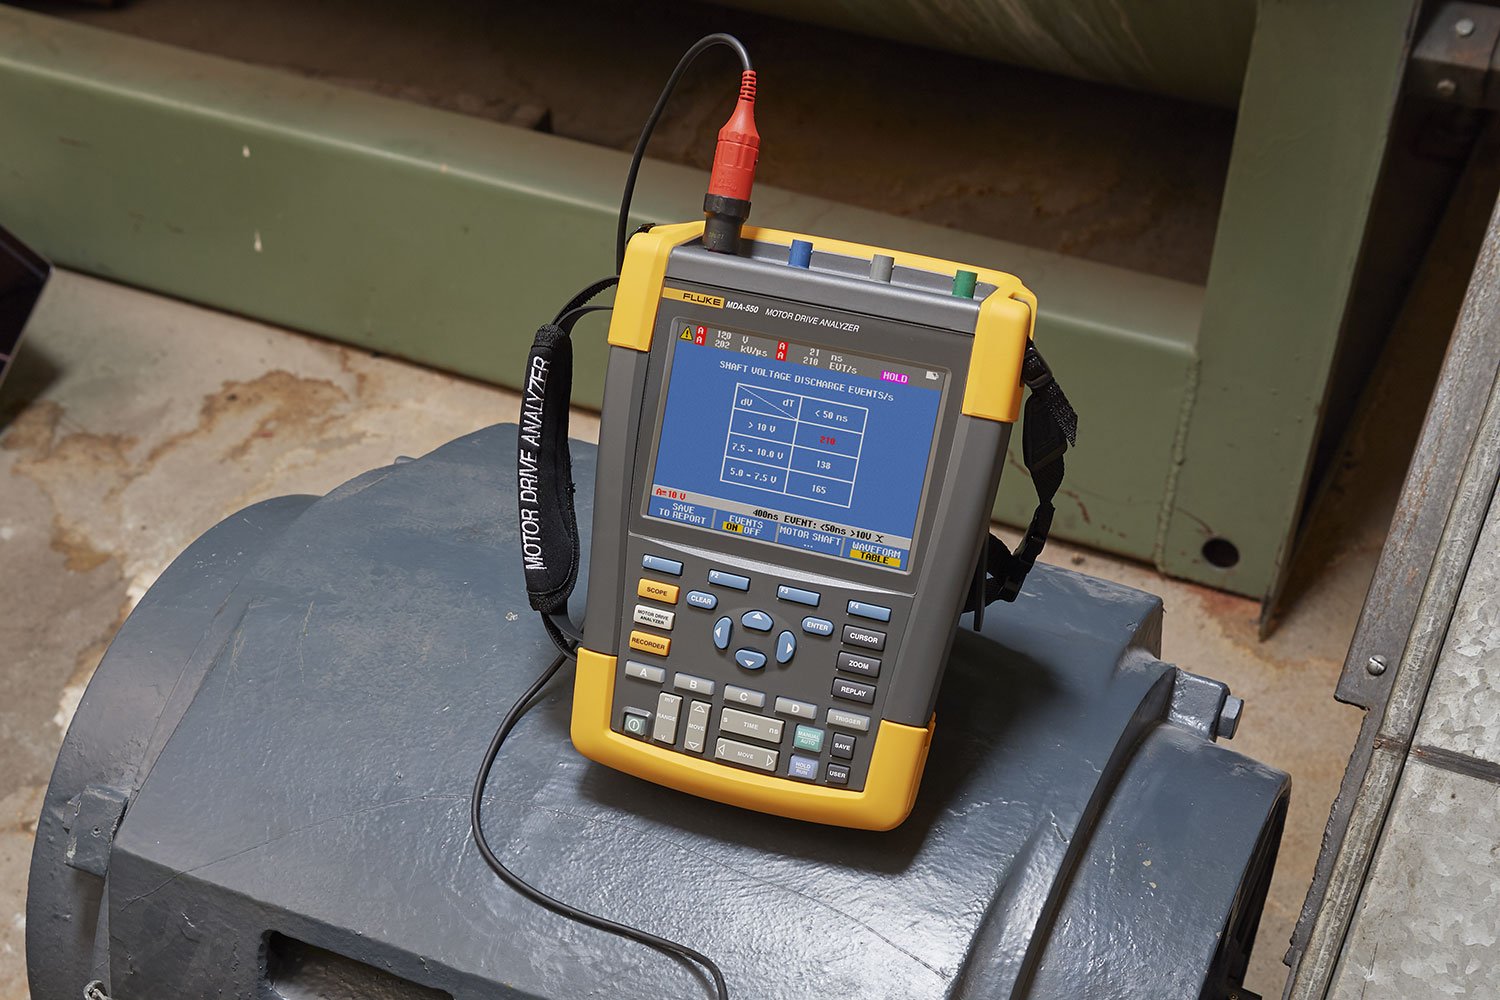 Making motor shaft voltage measurements with the MDA-550